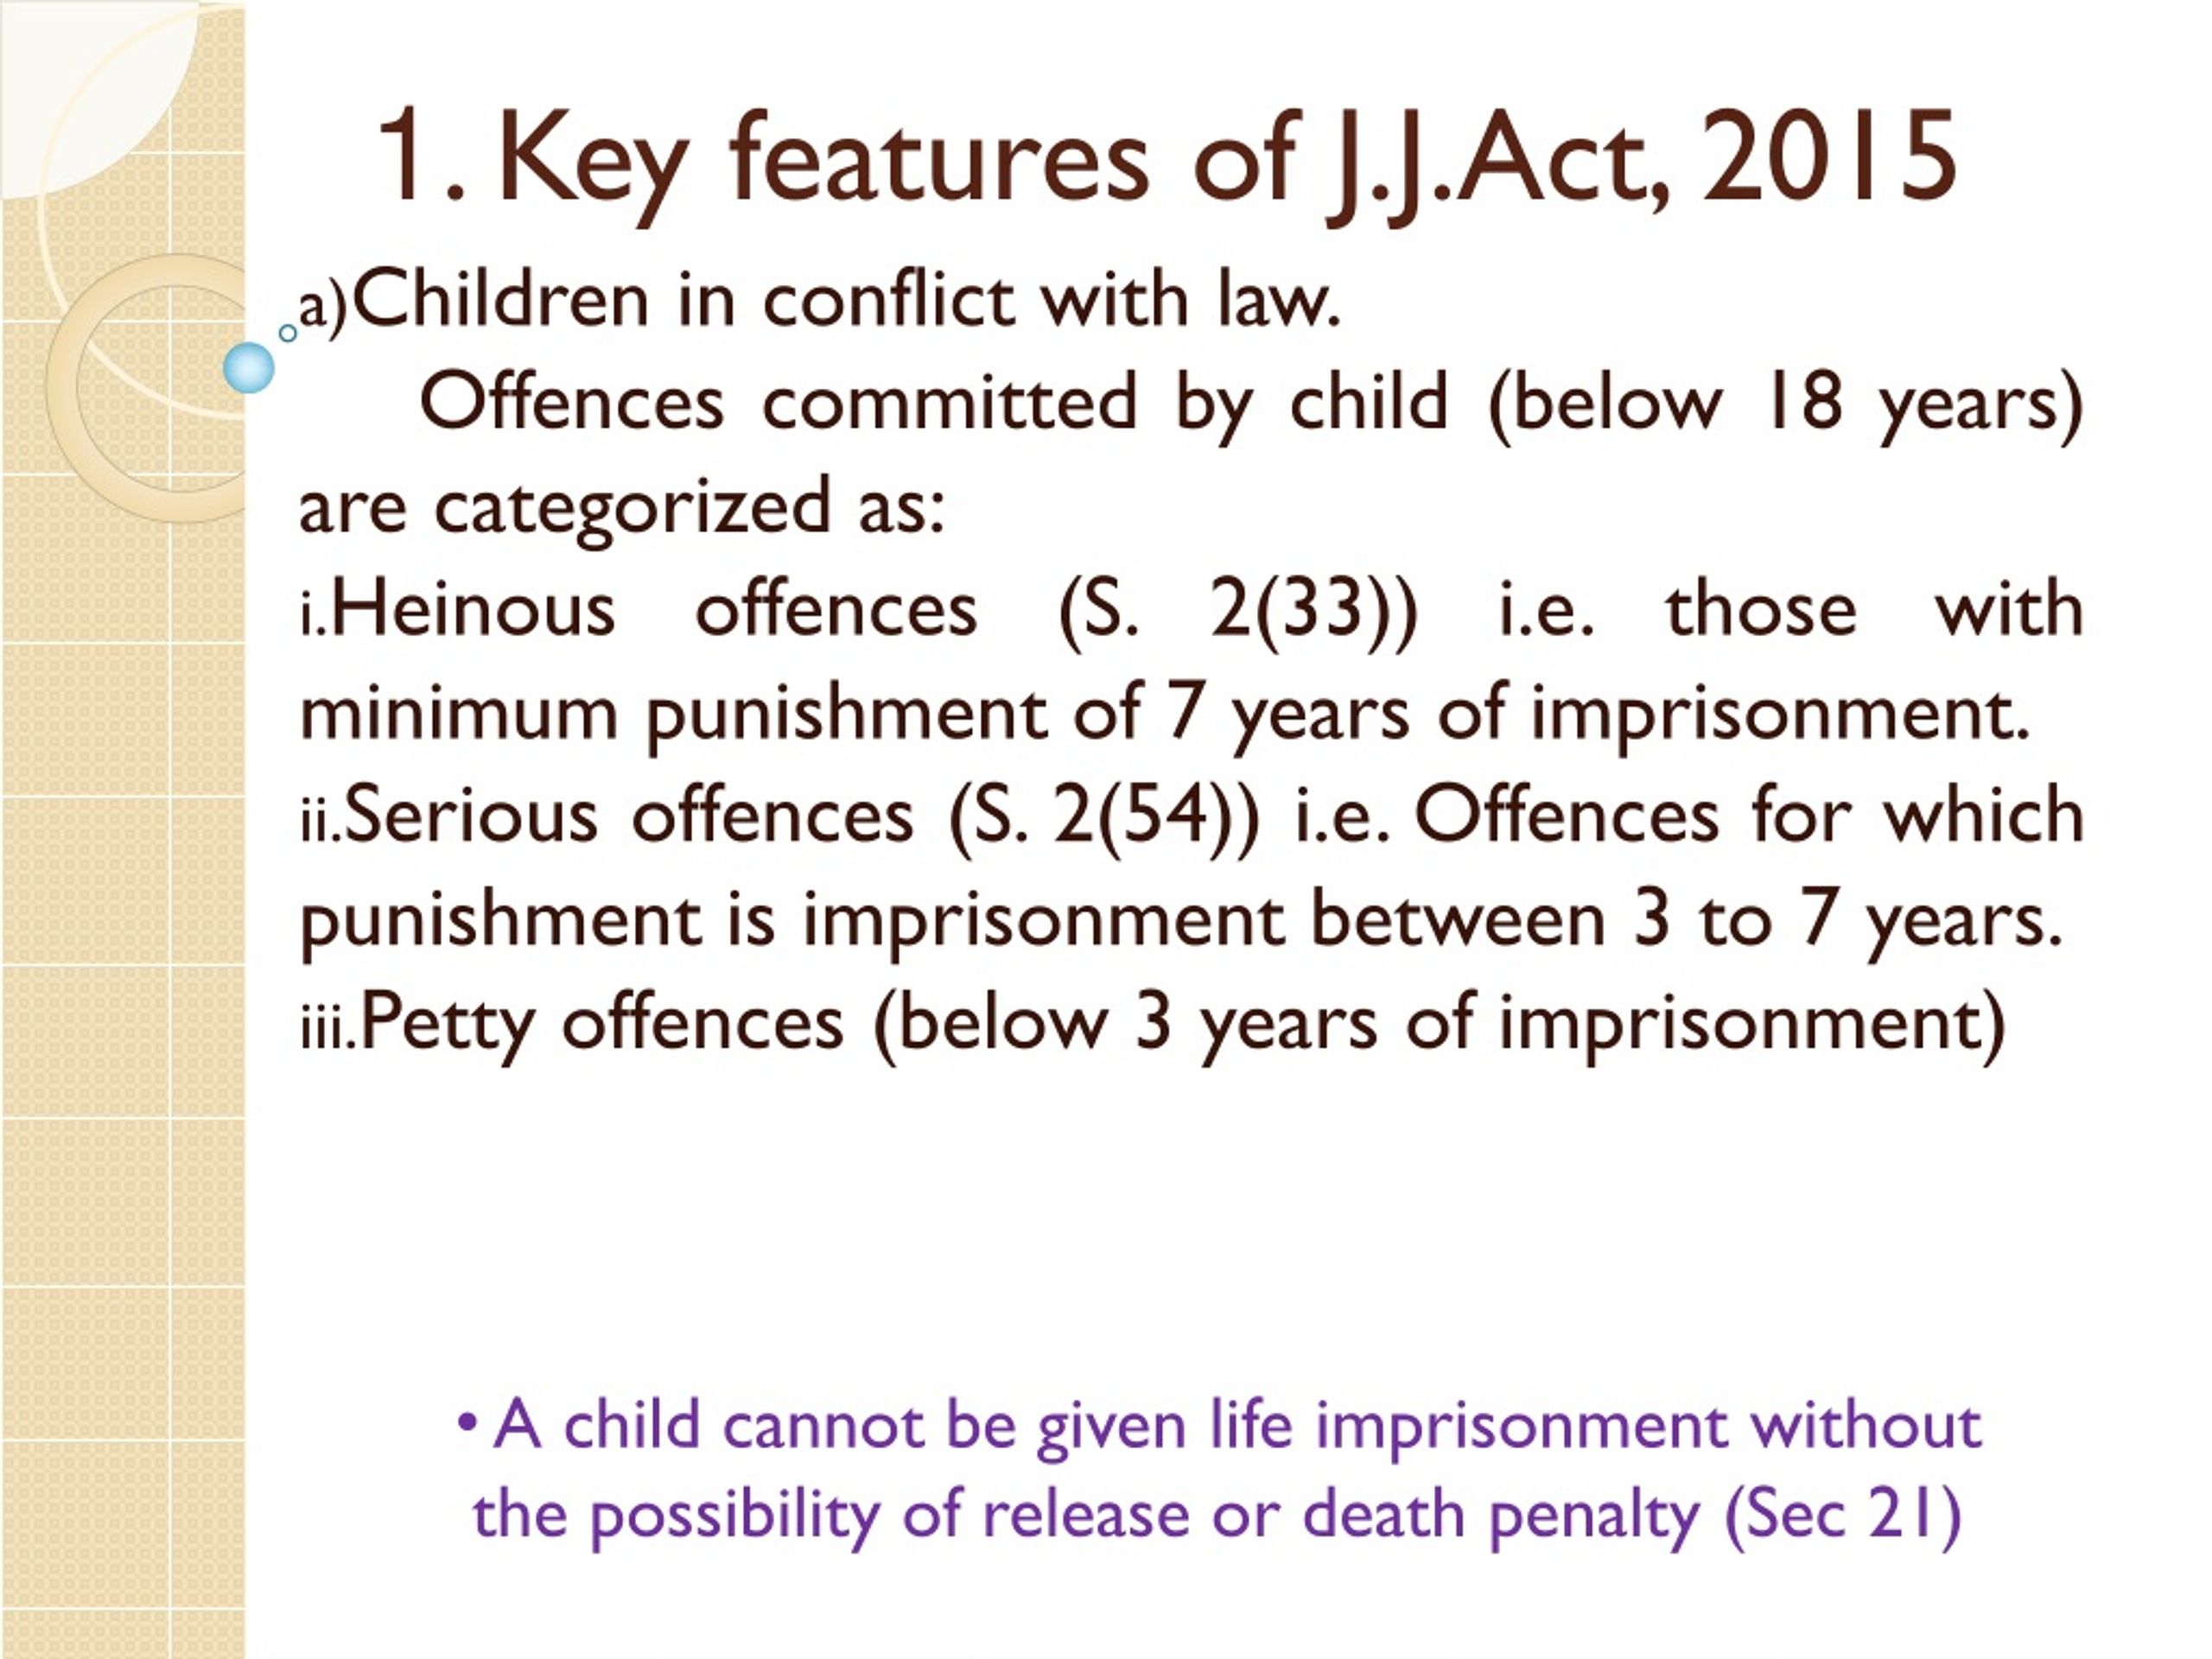 assignment on juvenile justice act